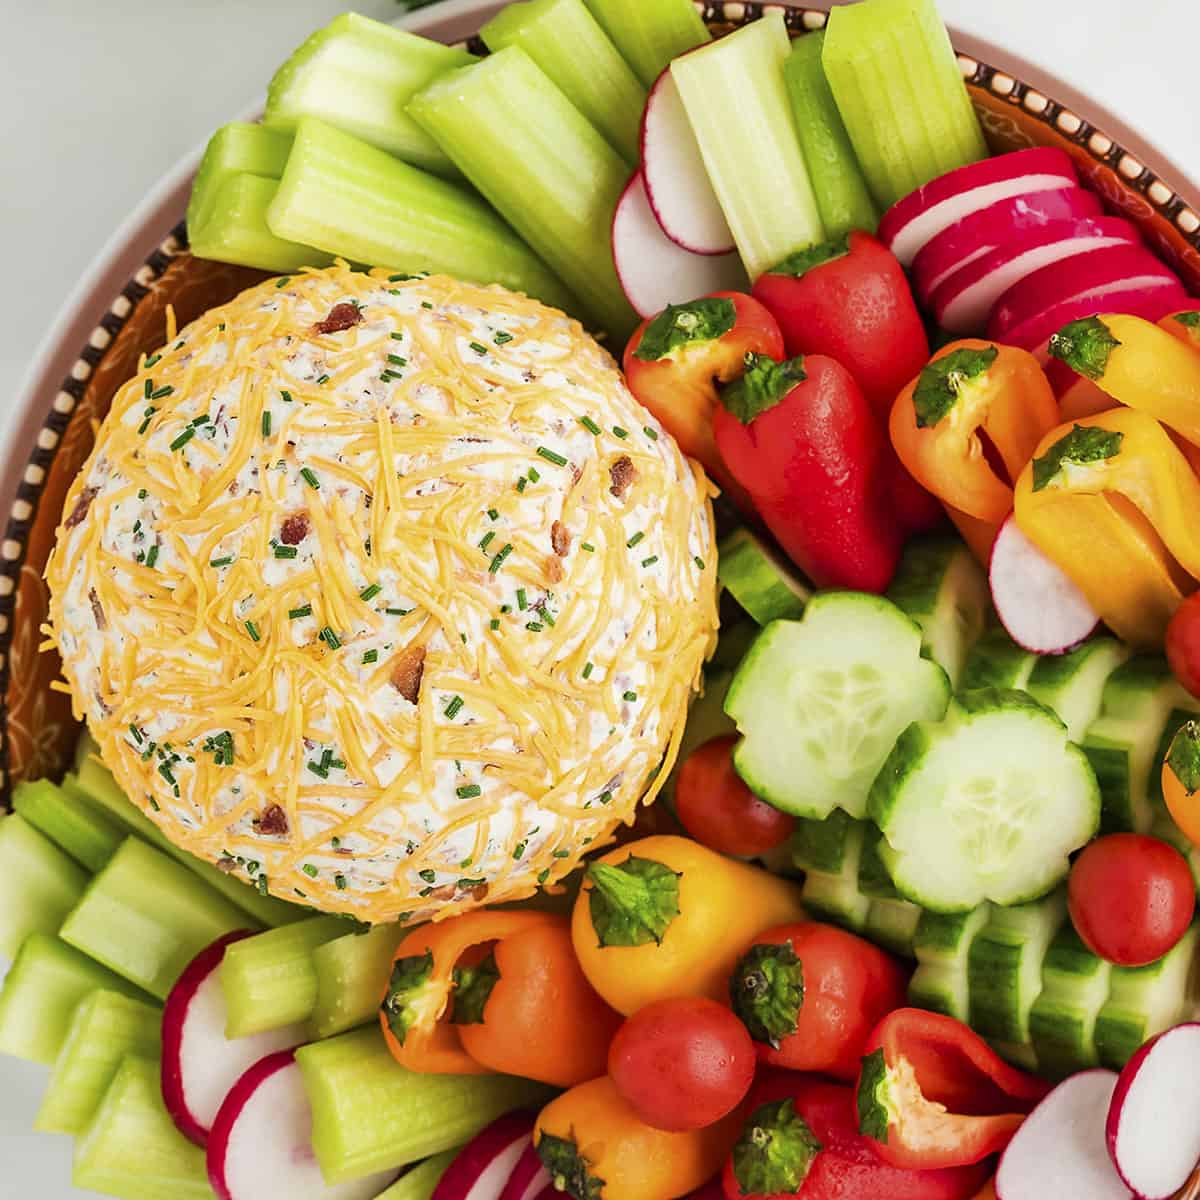 Cheese ball on platter surrounded by celery, cucumbers, and more low carb vegetables.